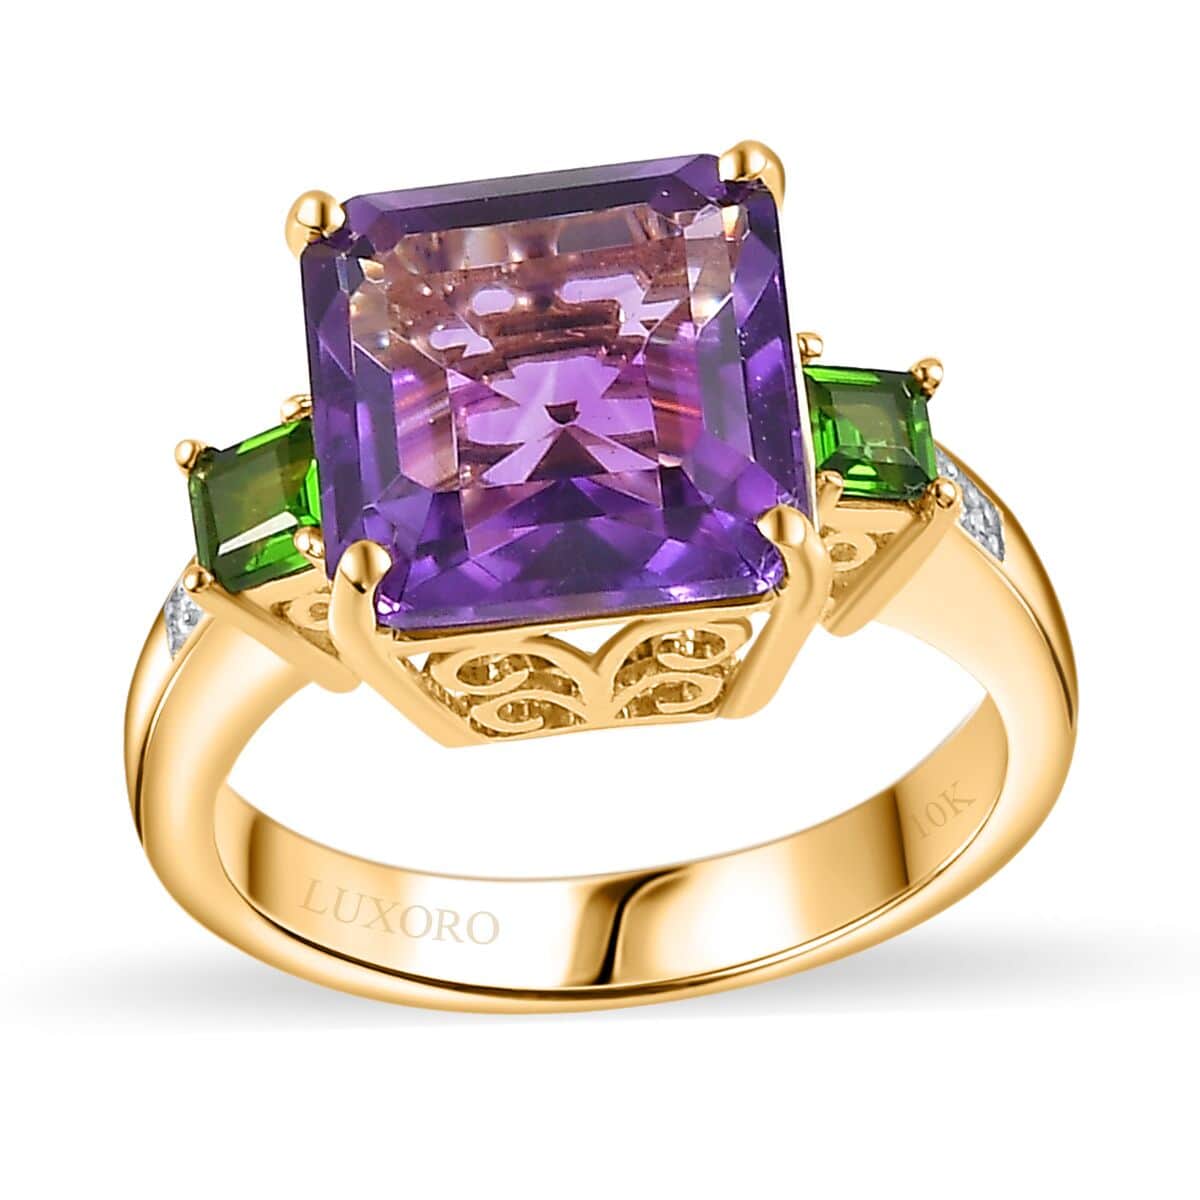 Luxoro 10K Yellow Gold Premium Moroccan Amethyst, Chrome Diopside and G-H I2 Diamond Accent Ring (Size 6.0) 4.15 Grams 4.90 ctw image number 0